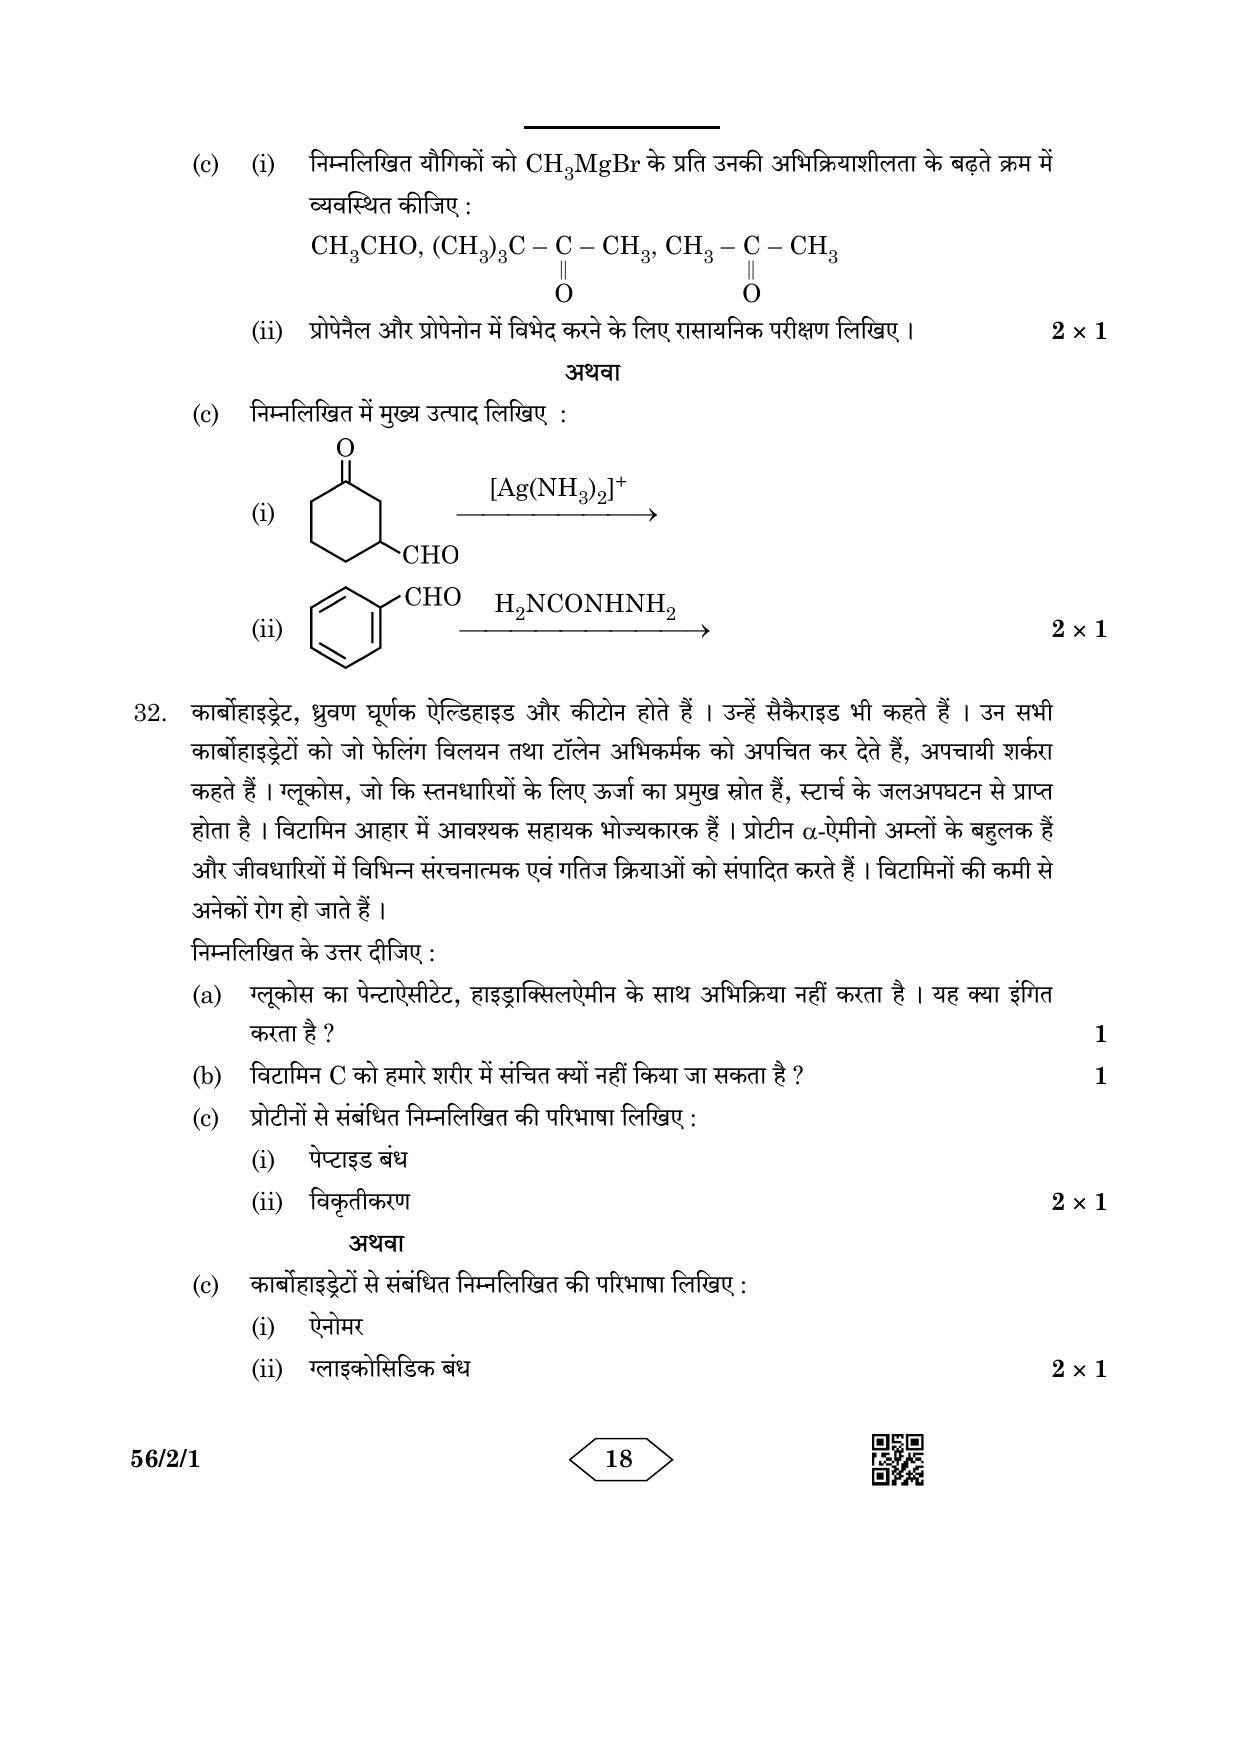 CBSE Class 12 56-2-1 Chemistry 2023 Question Paper - Page 18